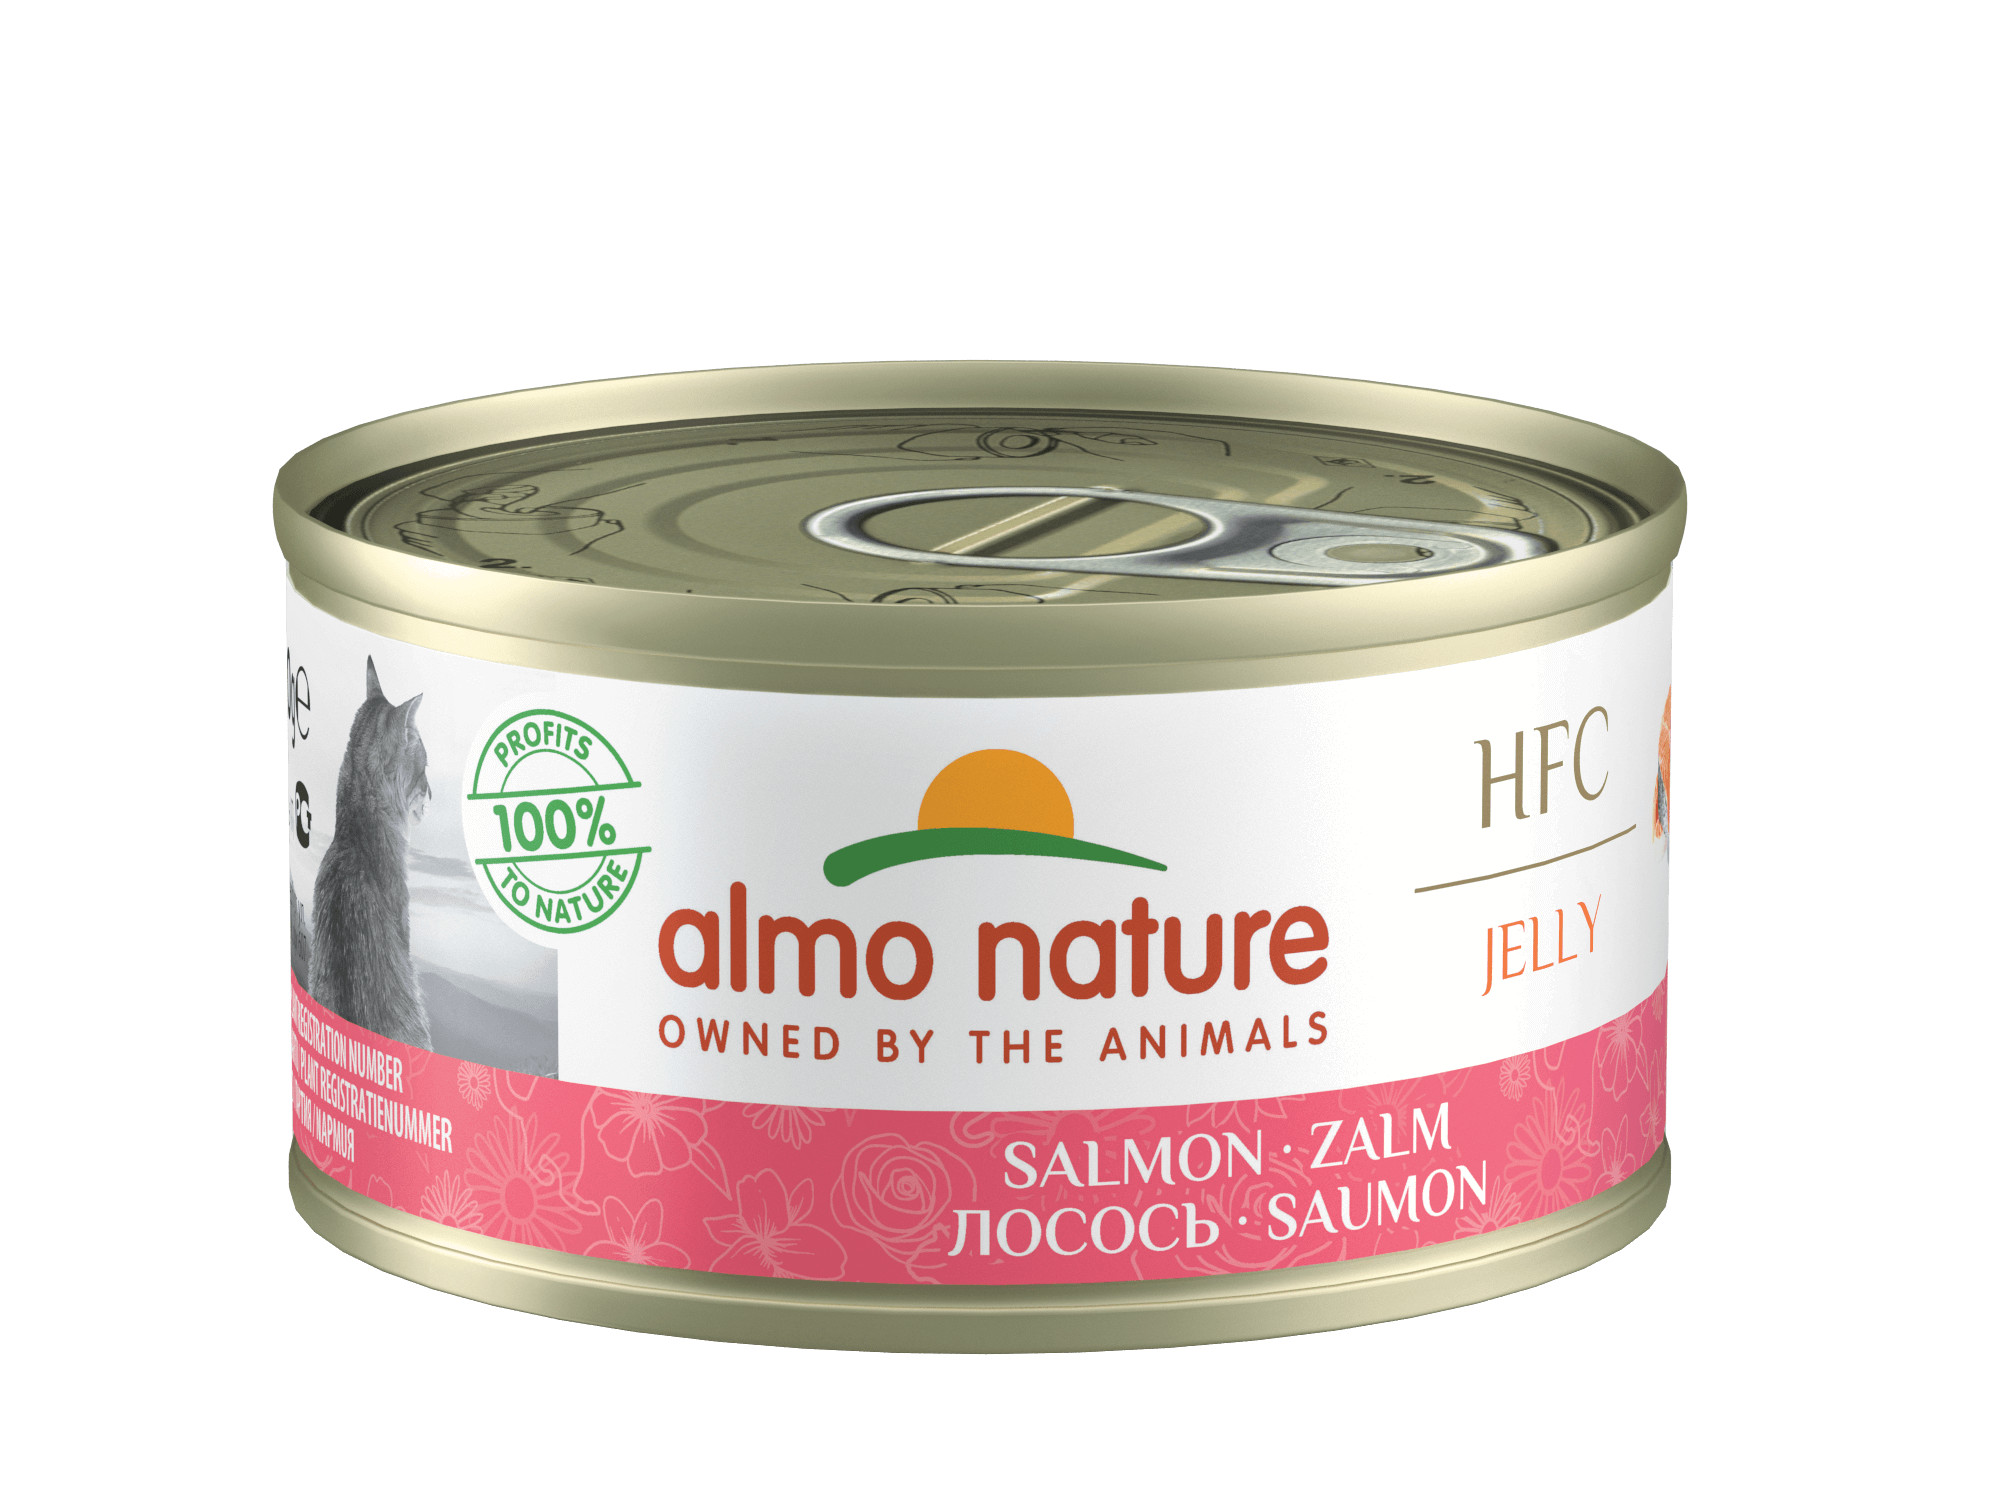 Almo Nature HFC Jelly Lachs